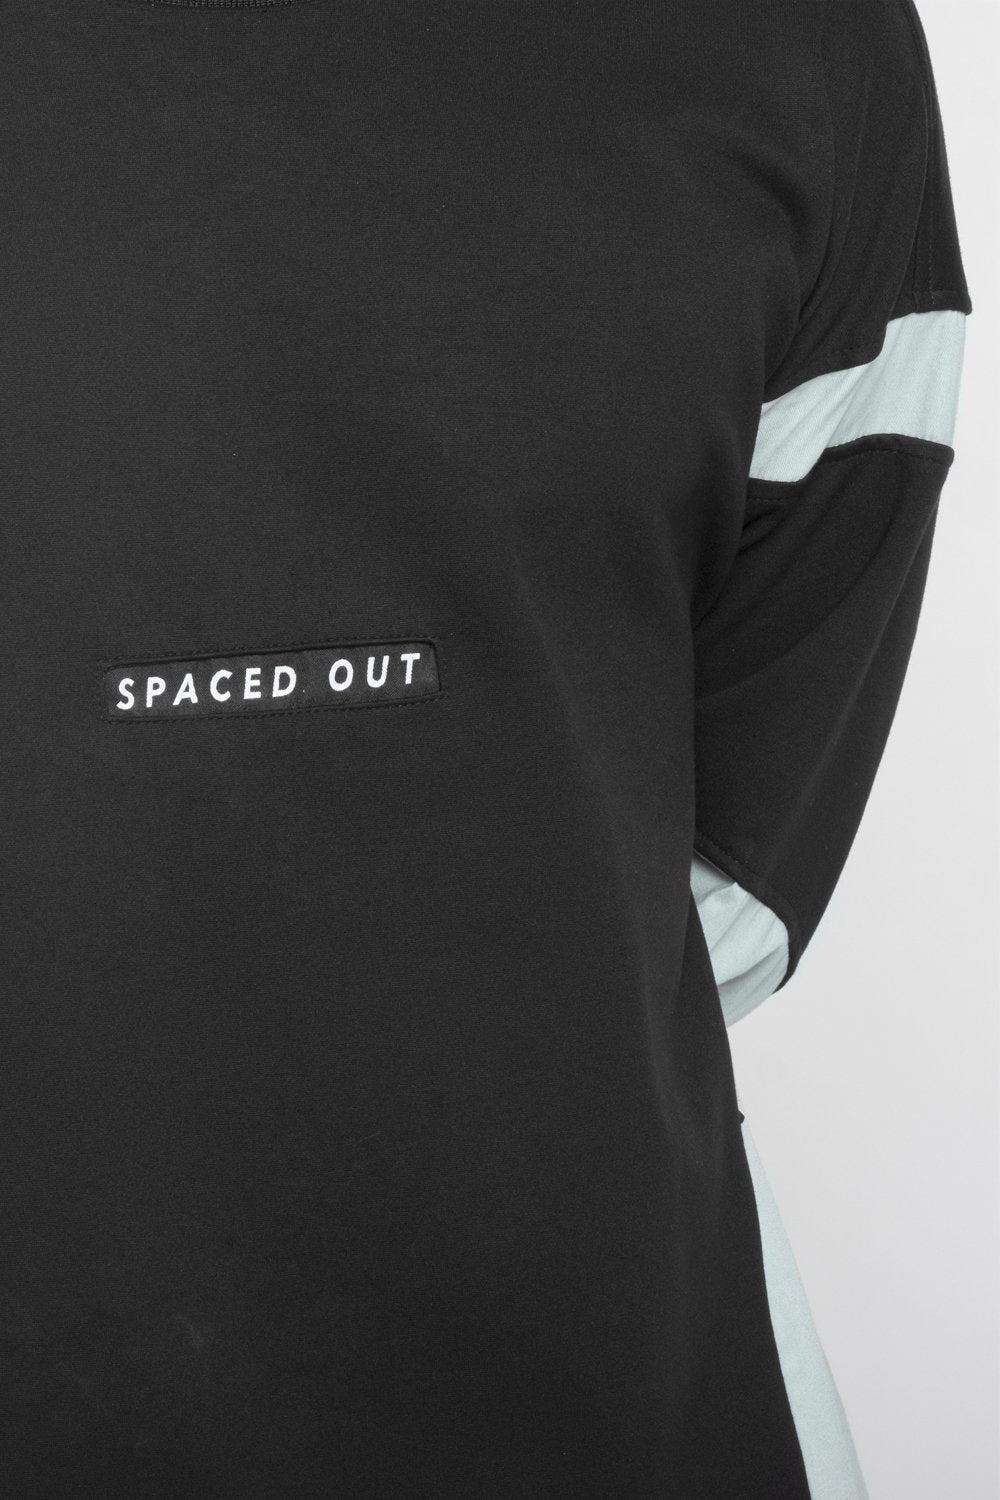 Black Unisex Sweatshirt wit orbit green details and spaced out logo.  Designed in Madras, Made in India  | BISKIT UNISEX CLOTHING LABEL